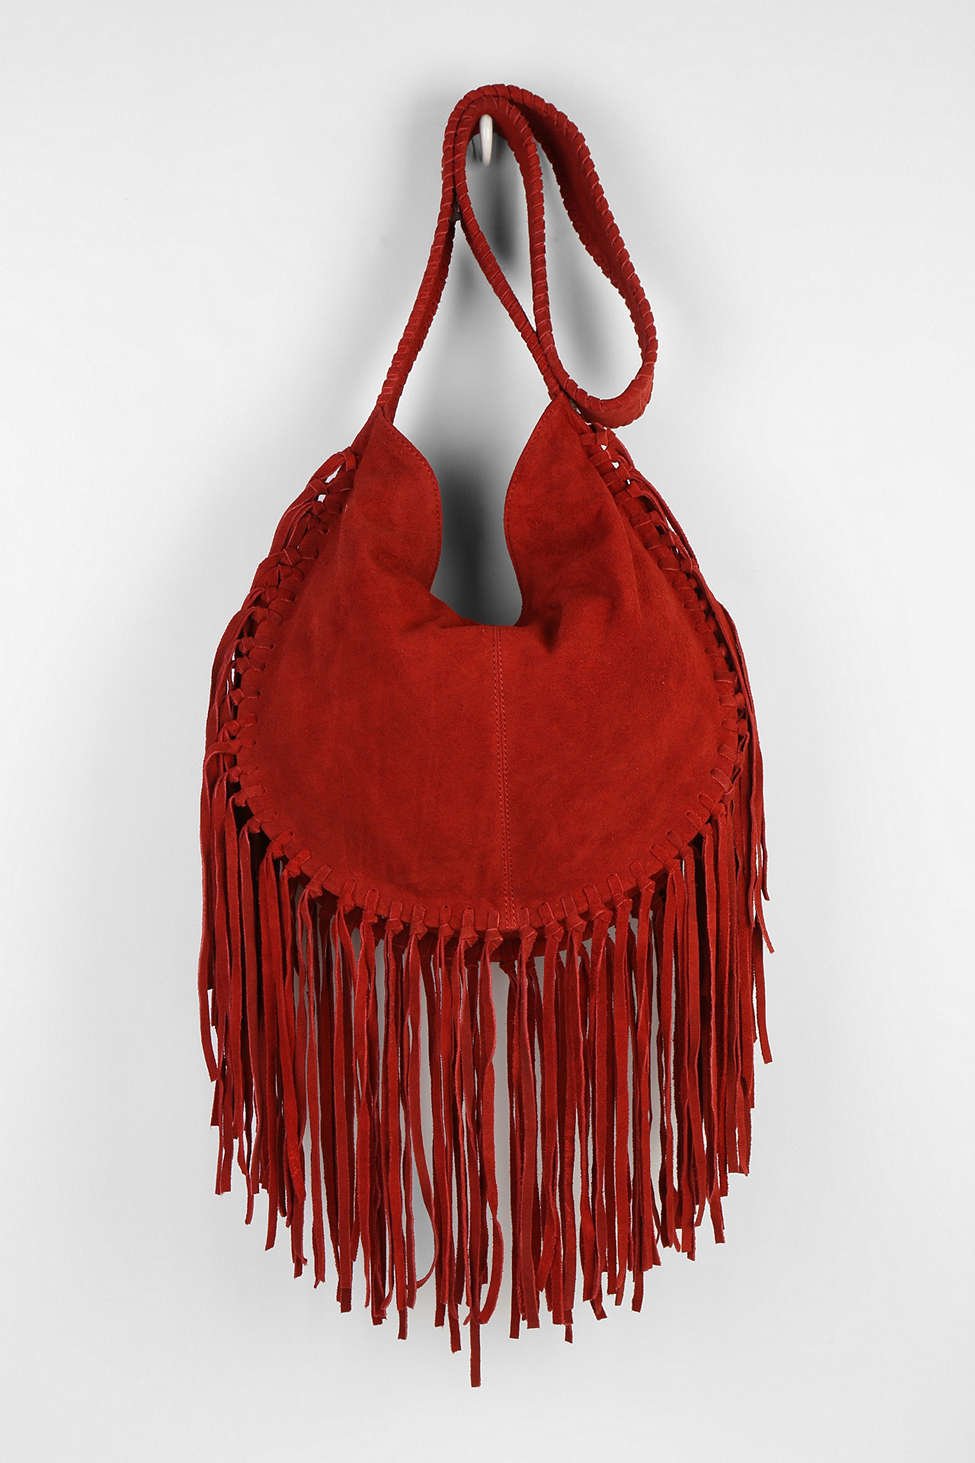 Red Leather Bag With Fringe Detail - Small & Square – Indian Headdress -  Novum Crafts